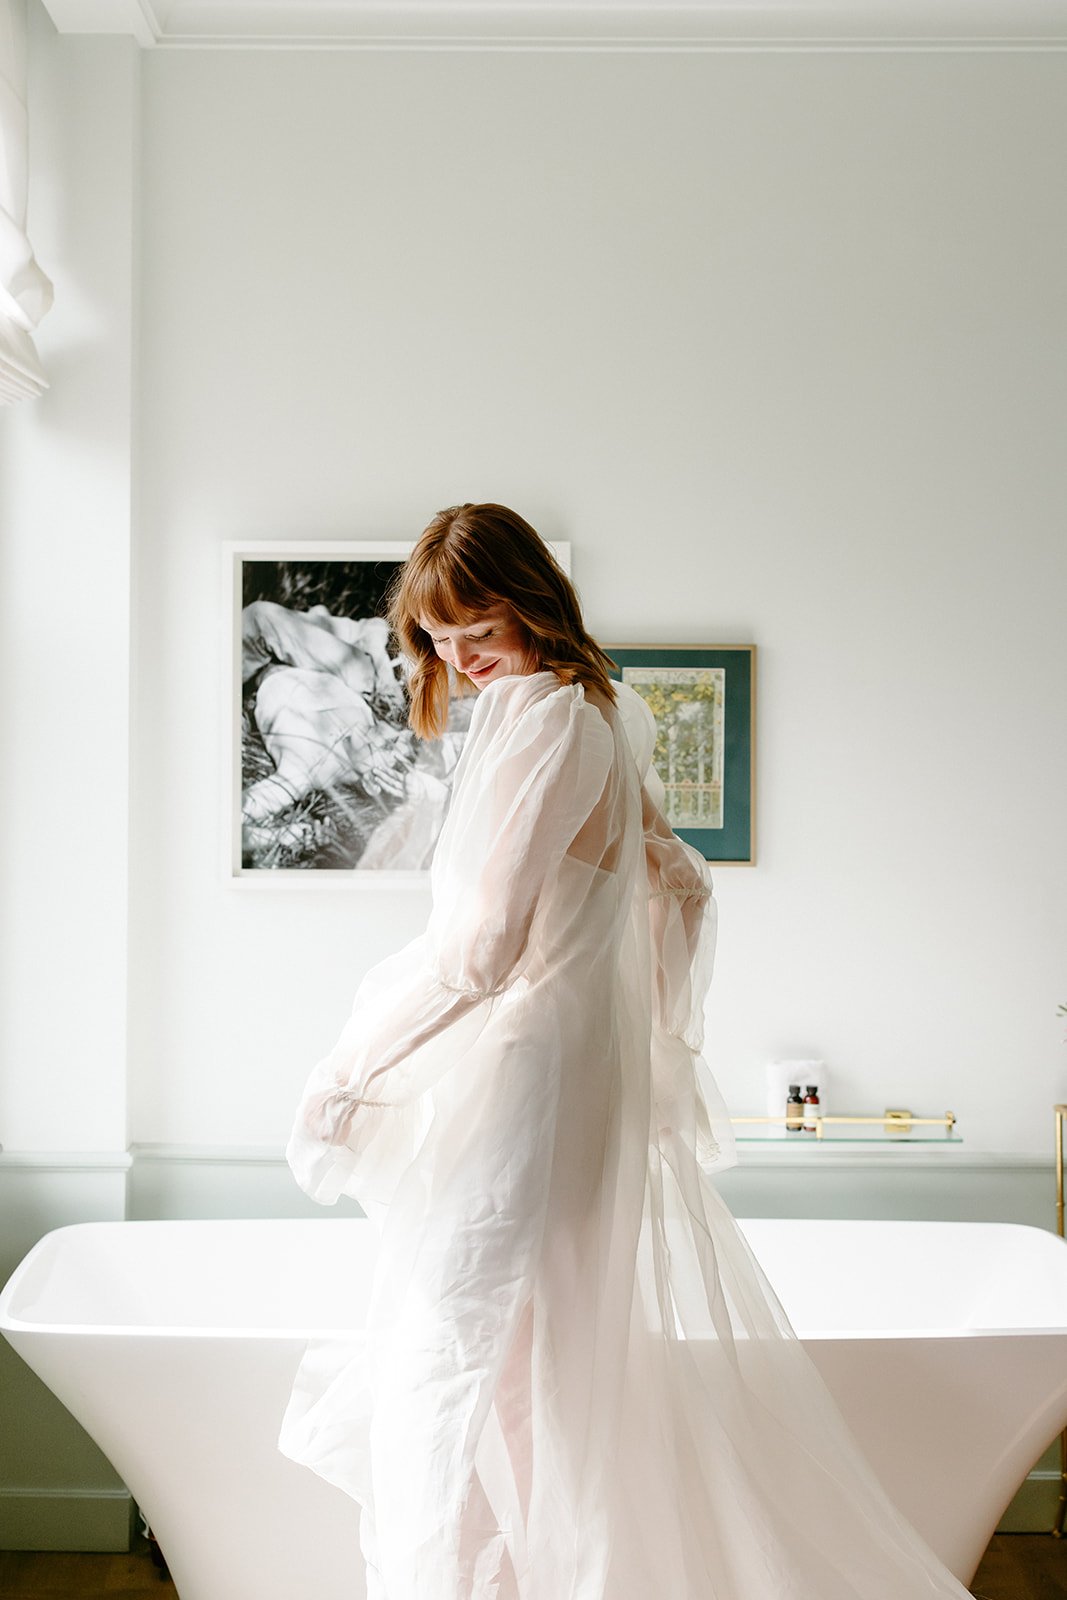 los angeles hair and makeup team style bride for her elopement in downtown los angeles